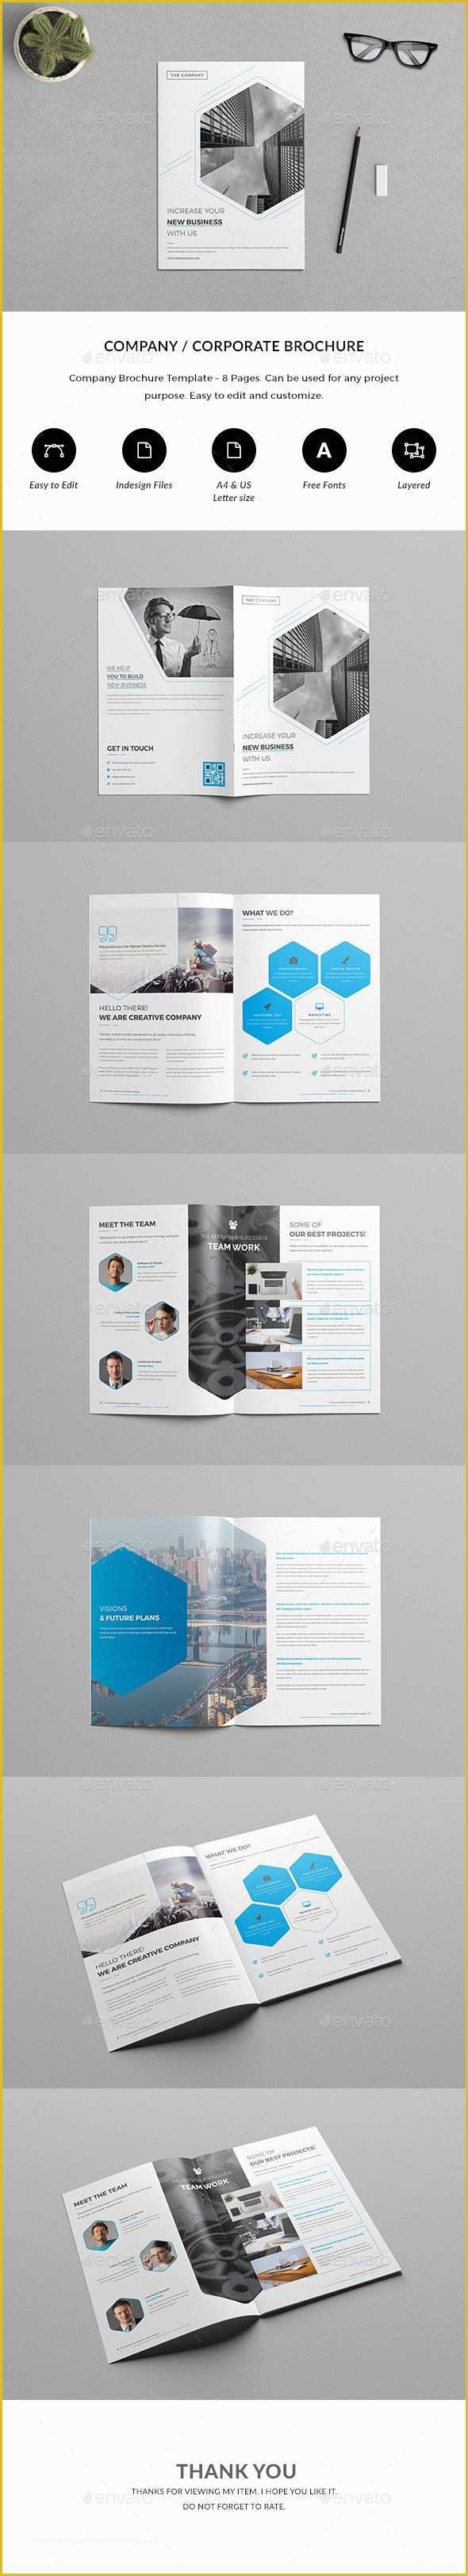 Software Company Brochure Templates Free Download Of 1000 Ideas About Corporate Brochure Design On Pinterest